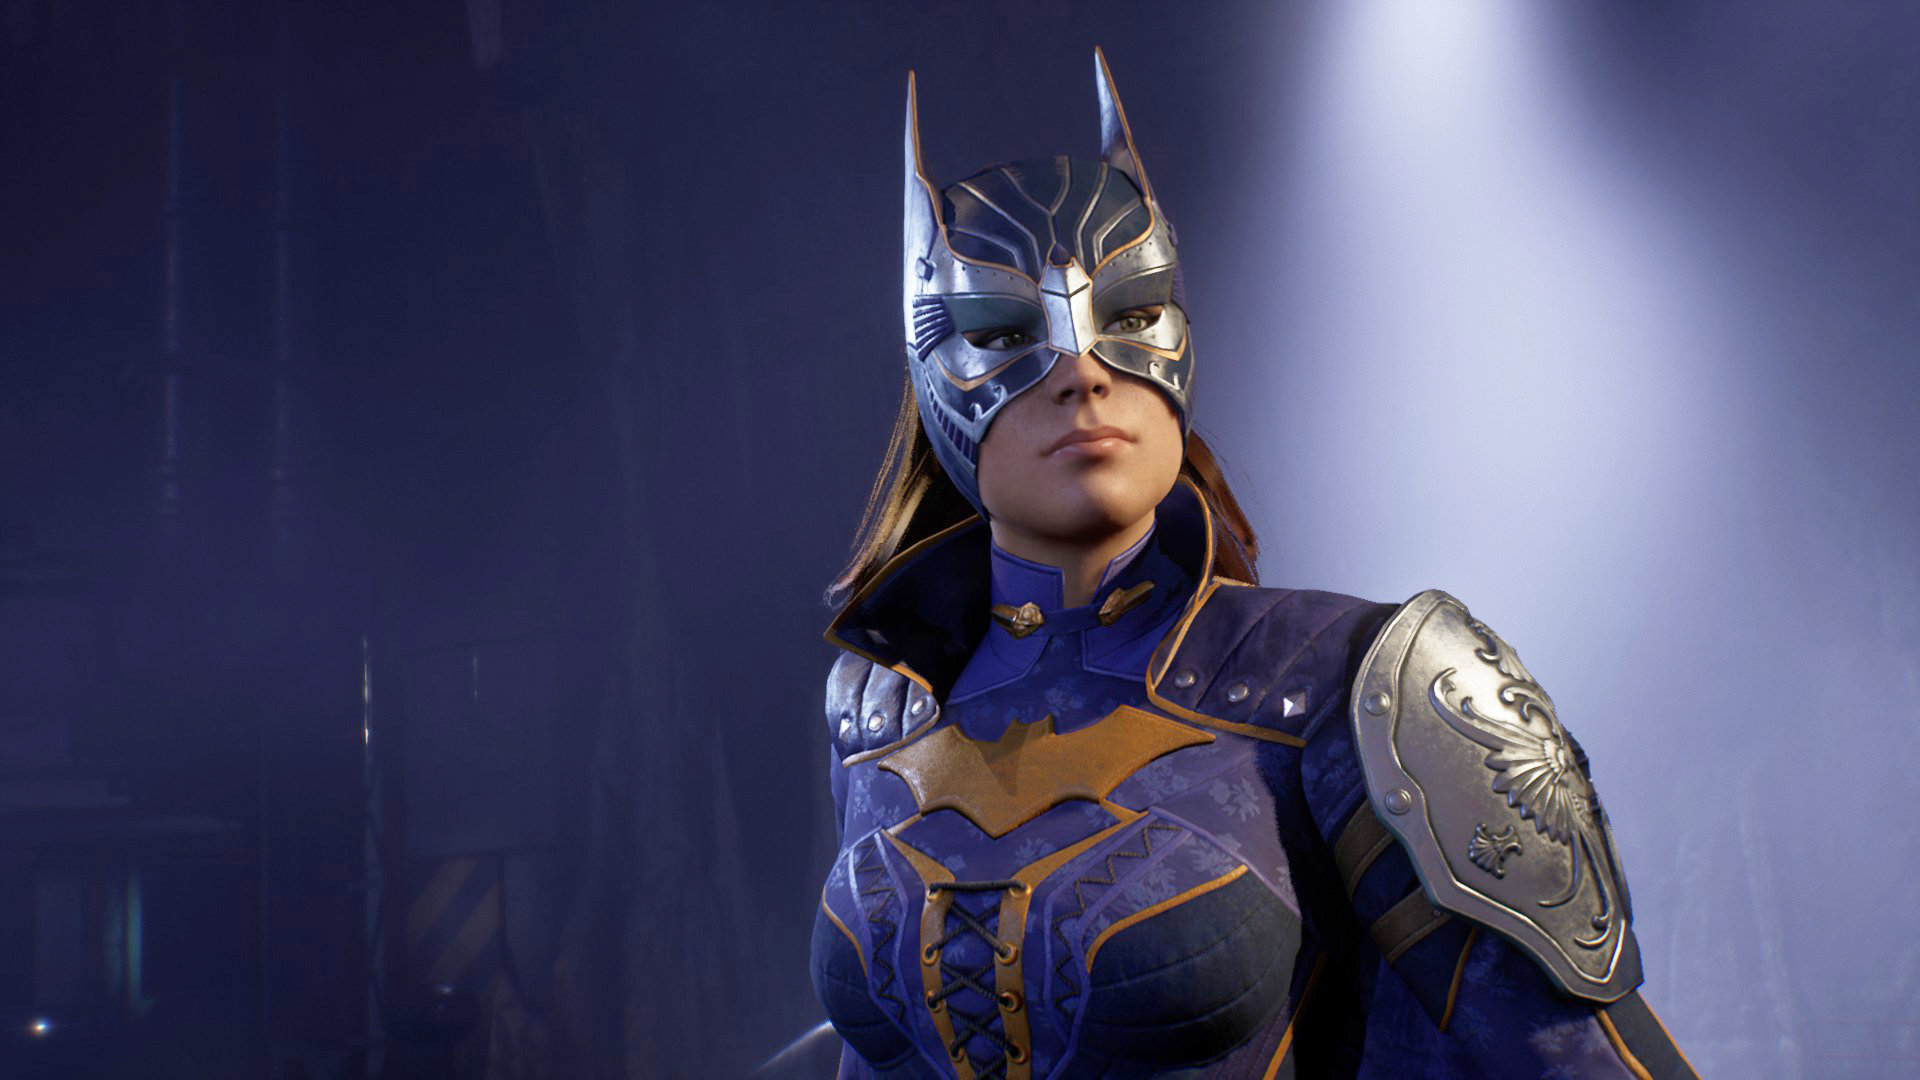 Gotham Knights' Review - Bat-Fantasies Are Fulfilled in Frustrating  Gameplay Experience - Bloody Disgusting